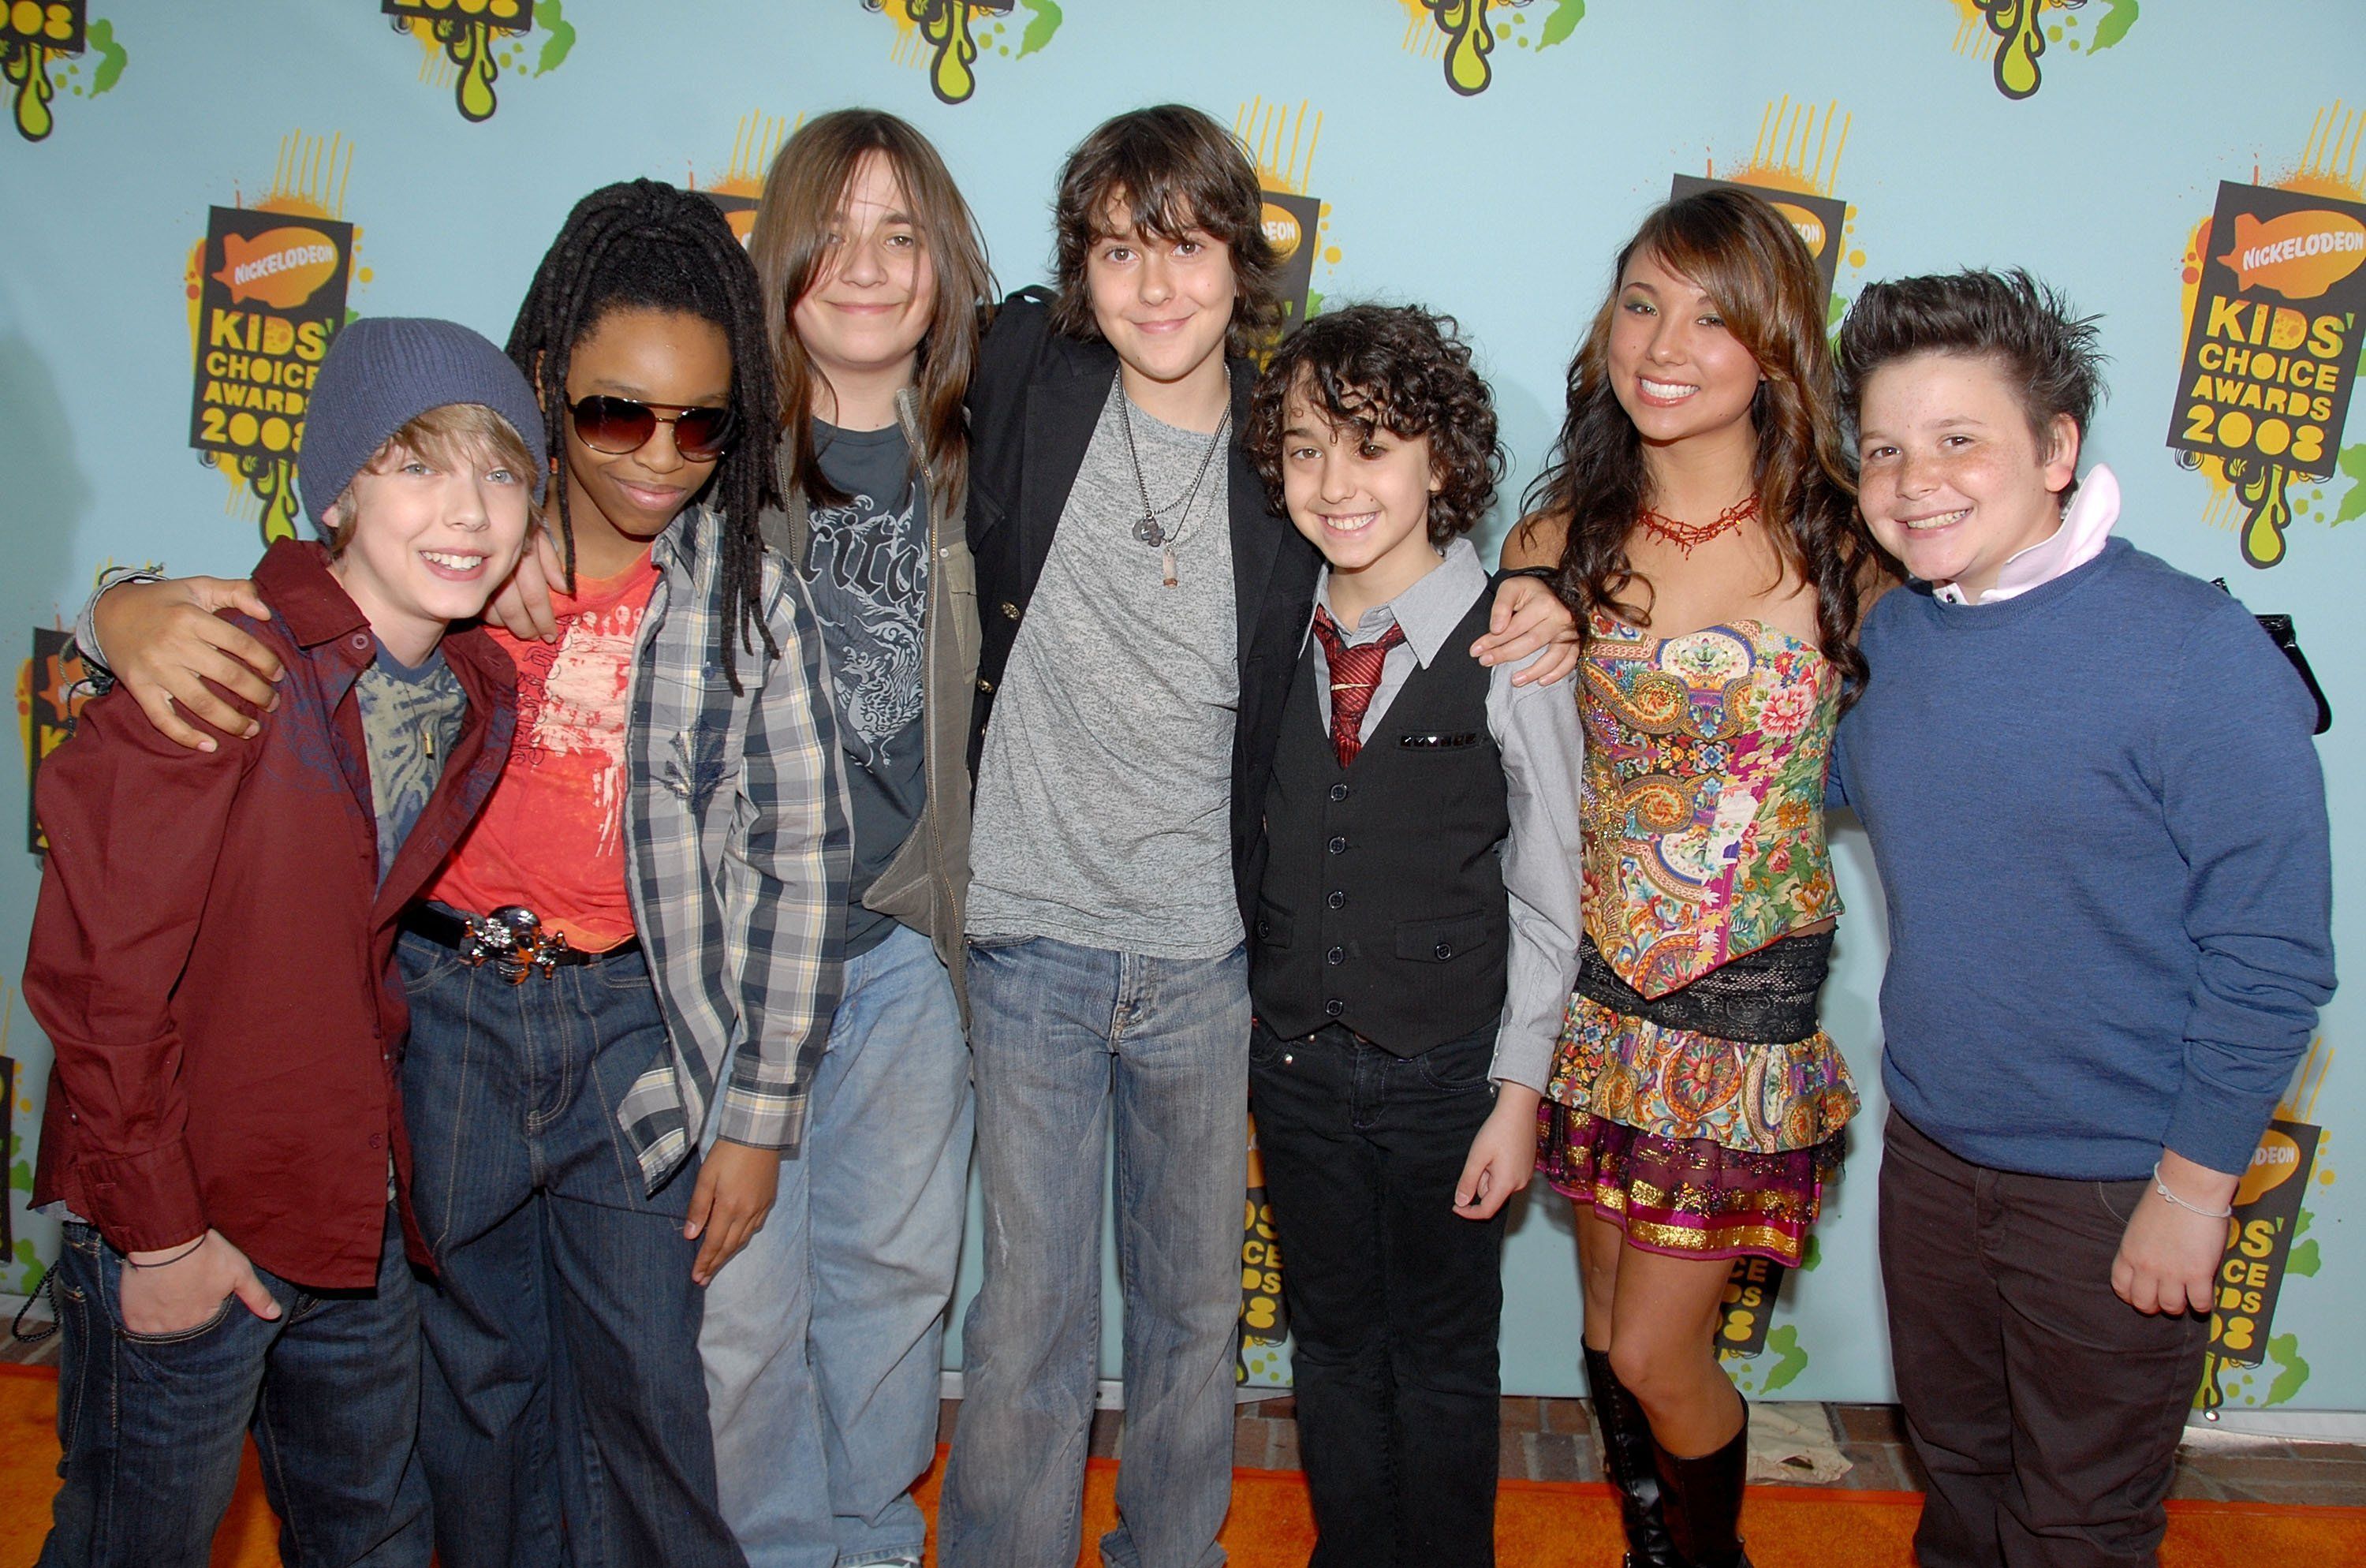 Baller reccomend Free naked brothers band wallpaper